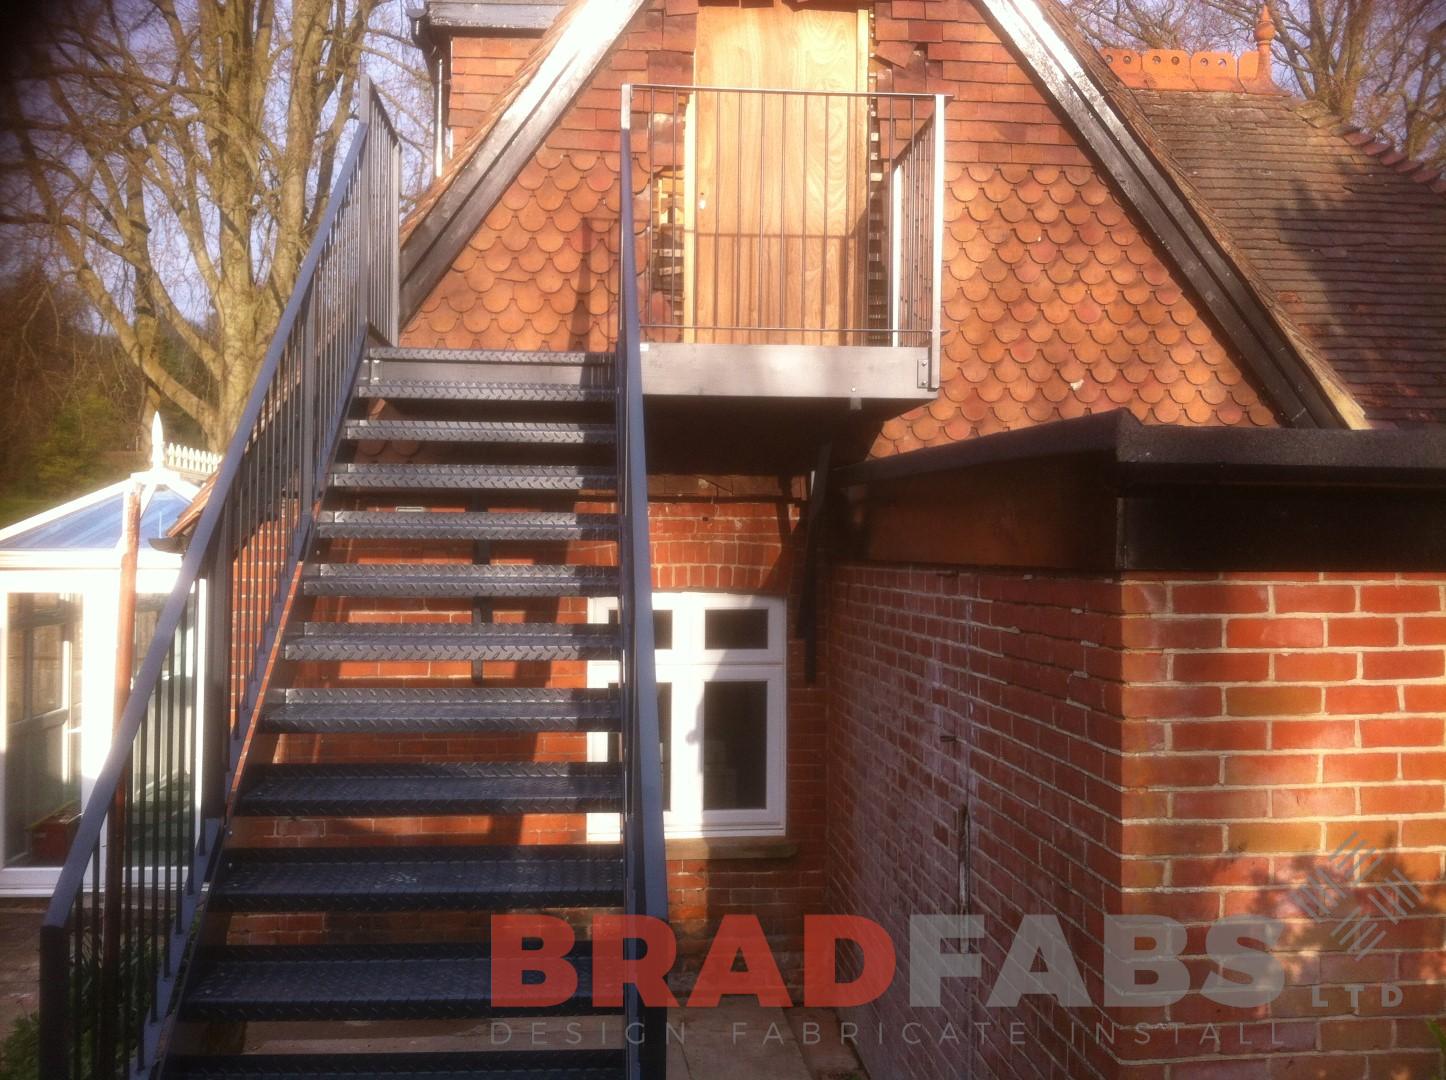 Steel Access Fire Escape Staircase for Caterham School by Bradfabs